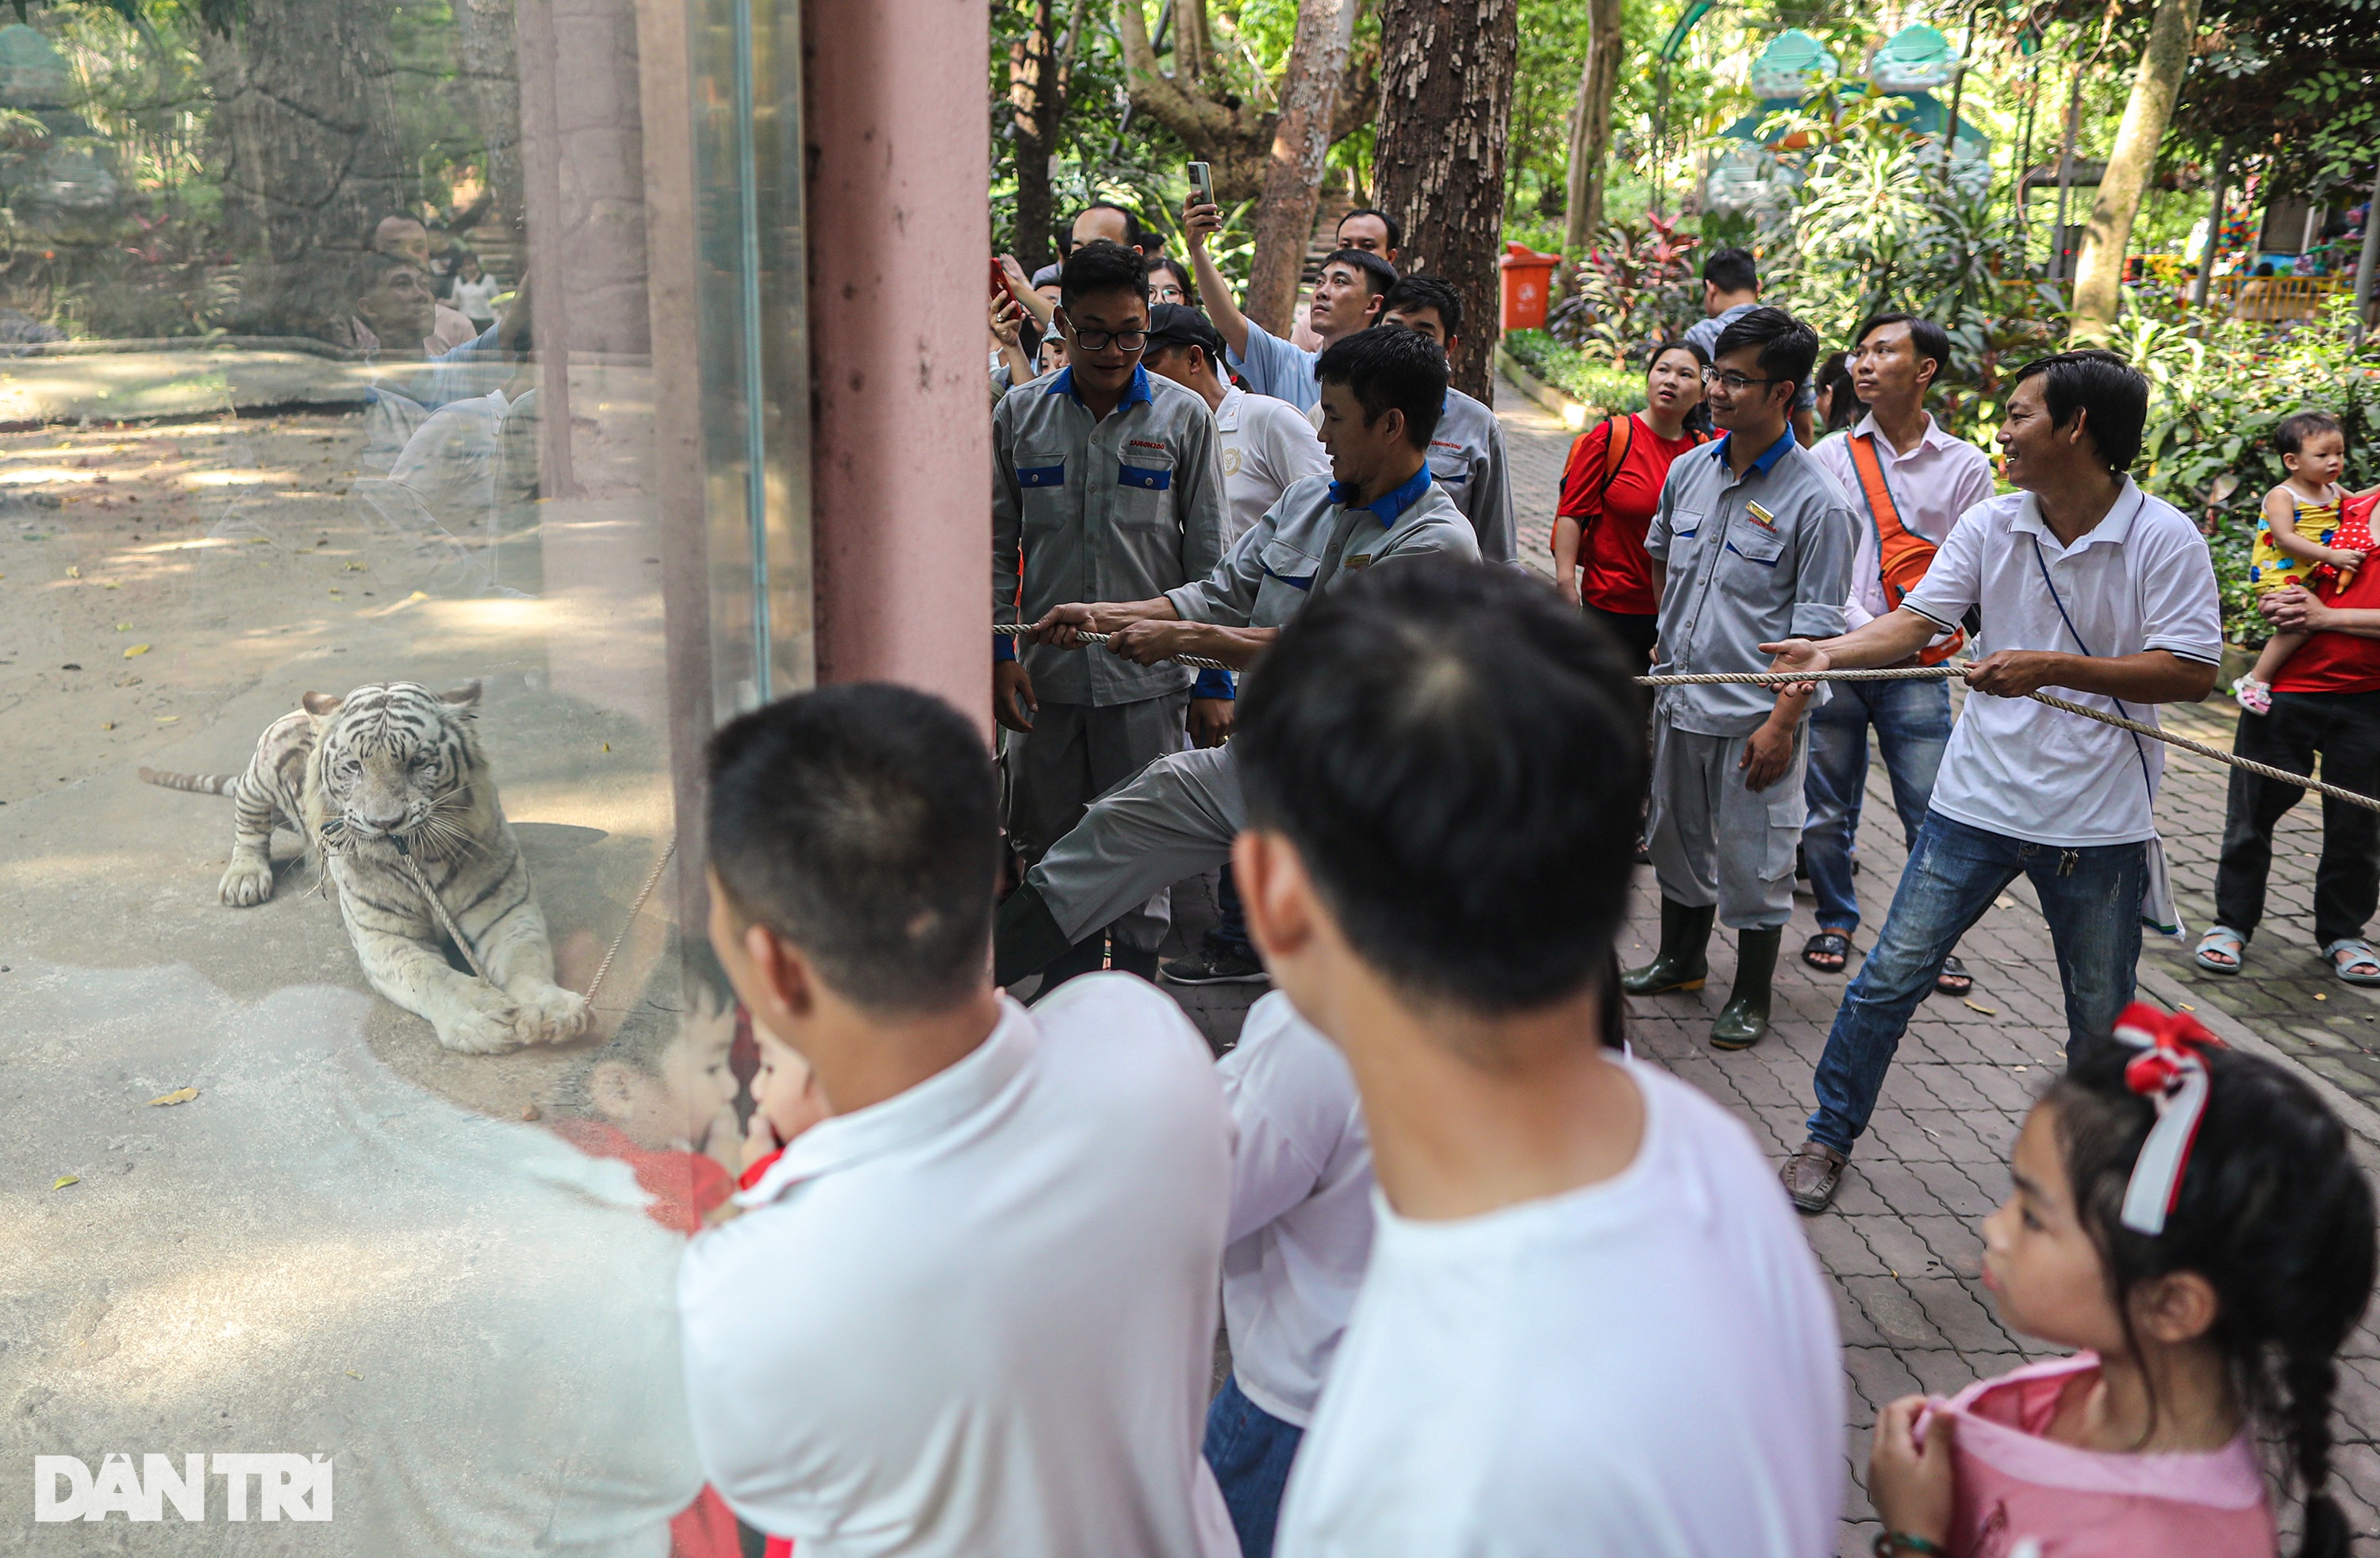 300kg white tiger tugs war with tourists in the Zoo on the first day of Tet - December 1